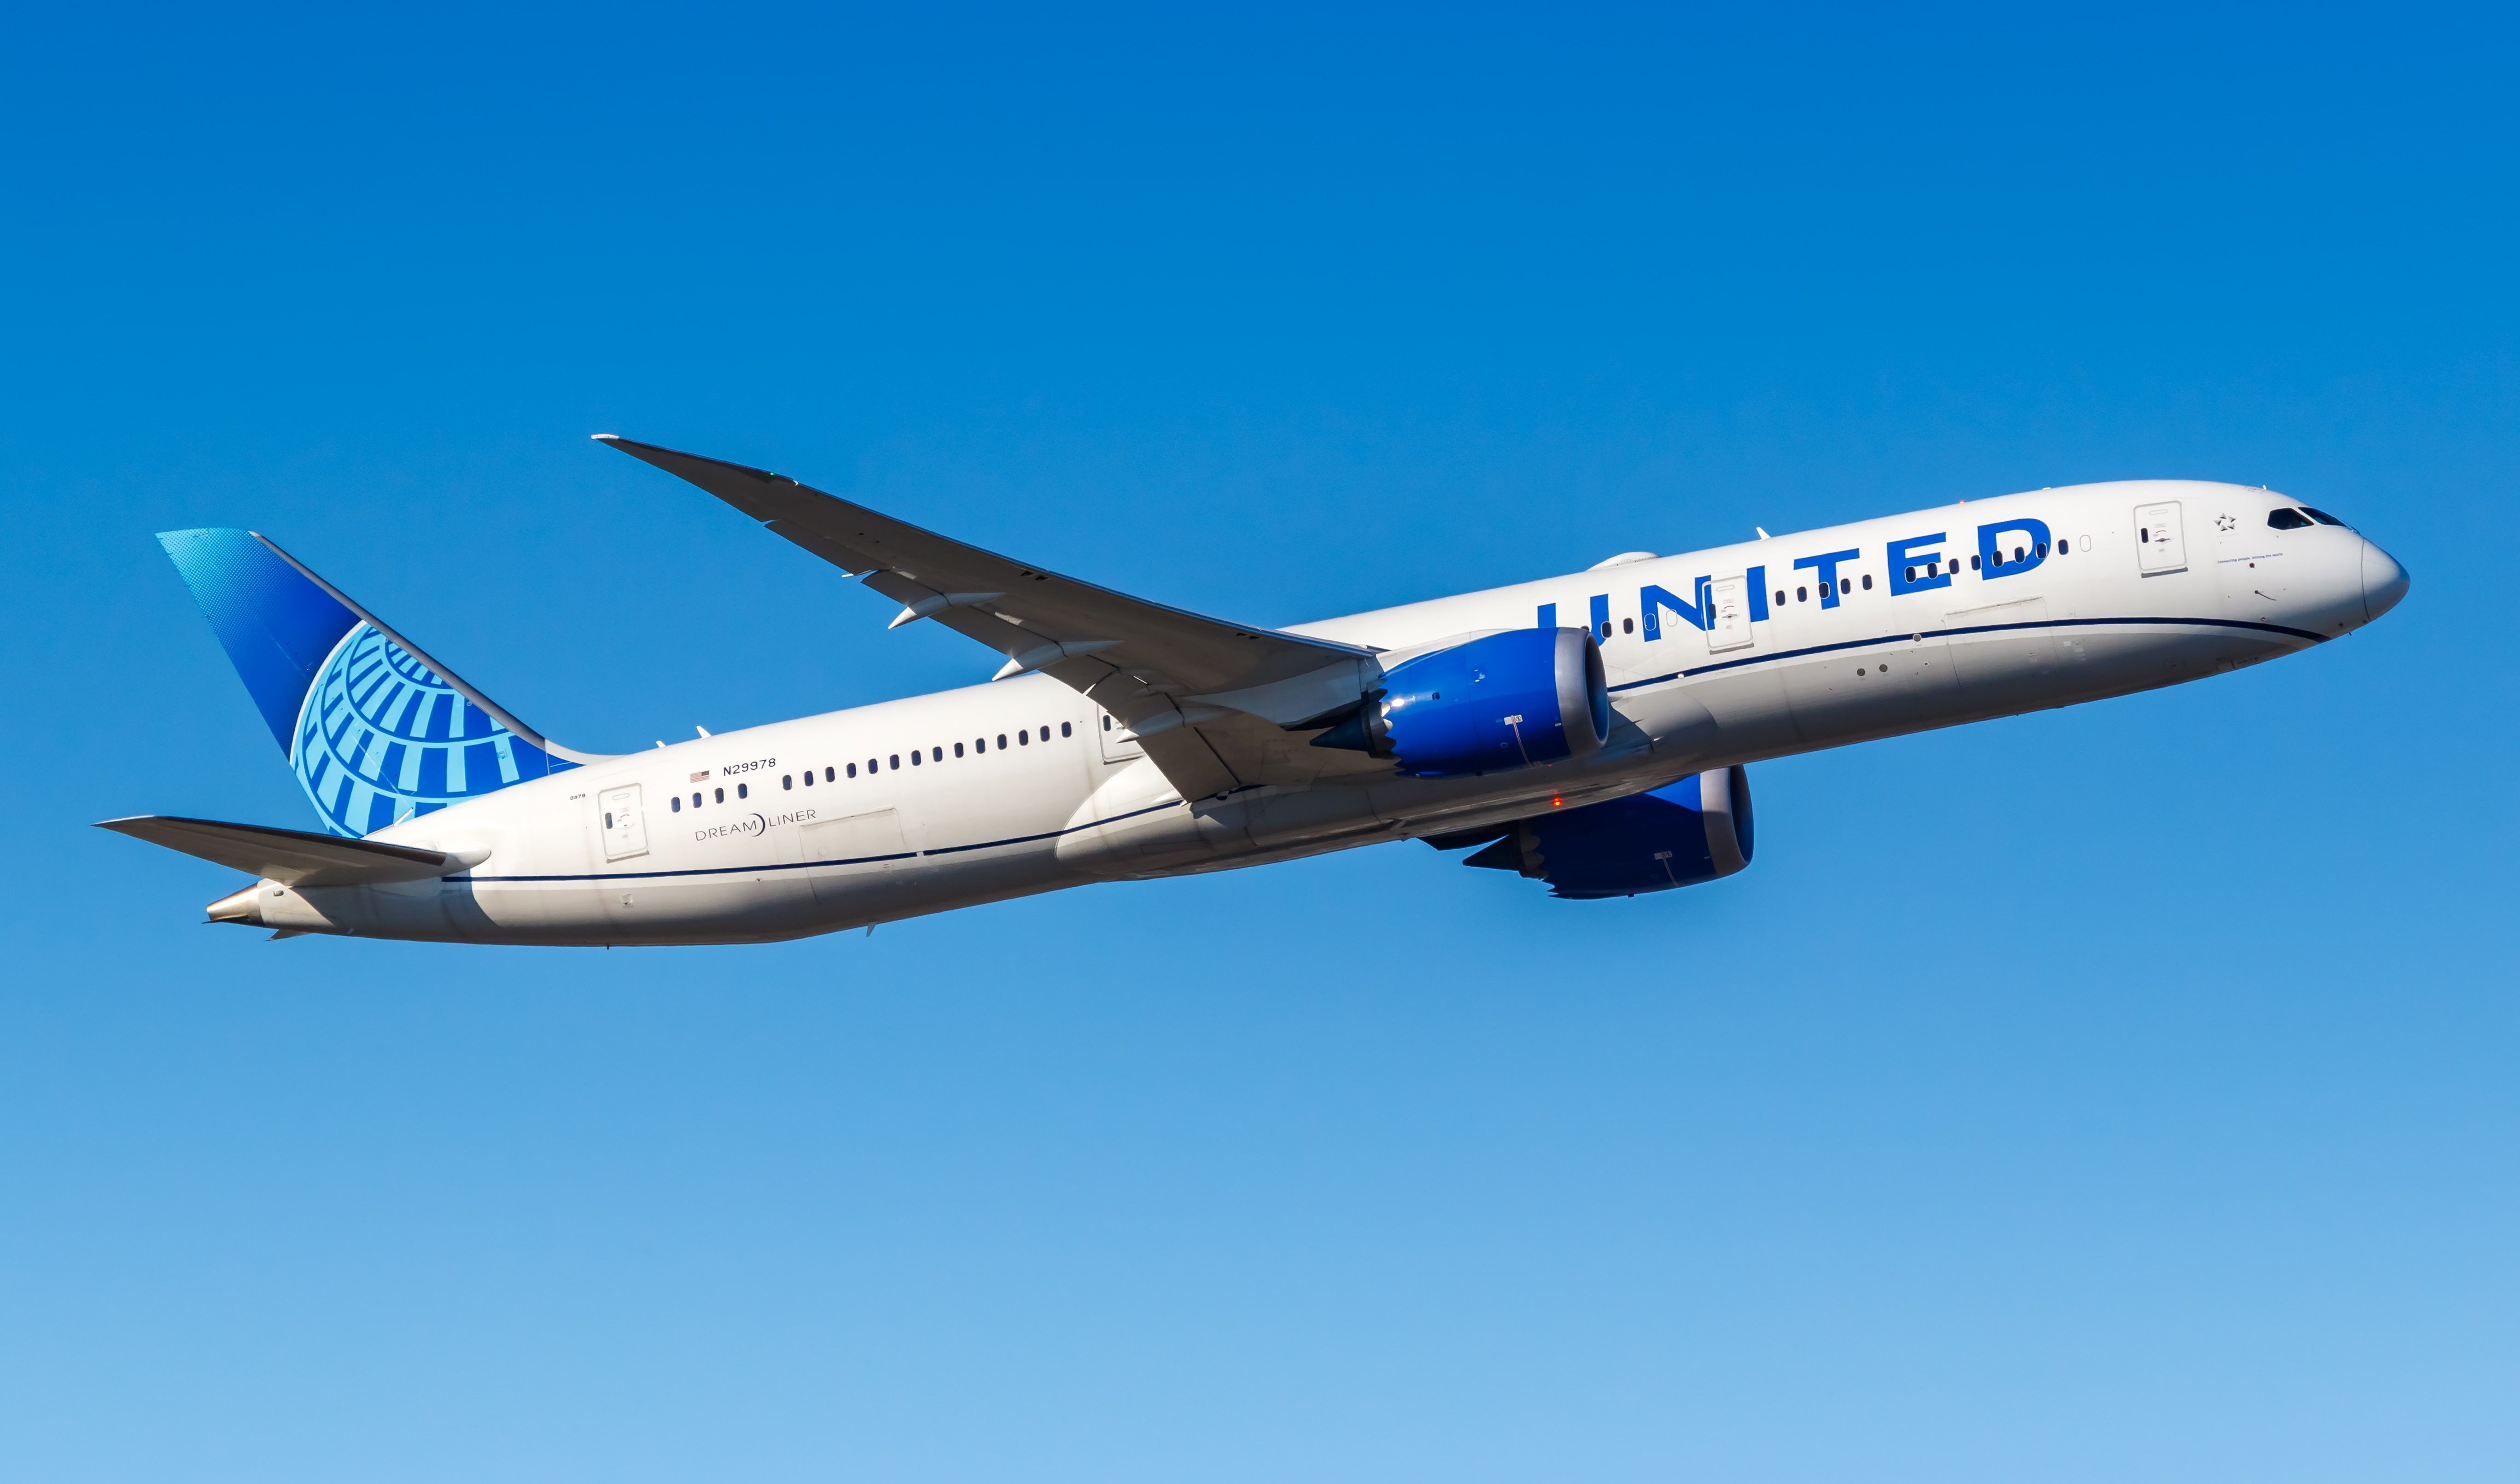 A United Airlines Boeing 787-9 flying in the sky.